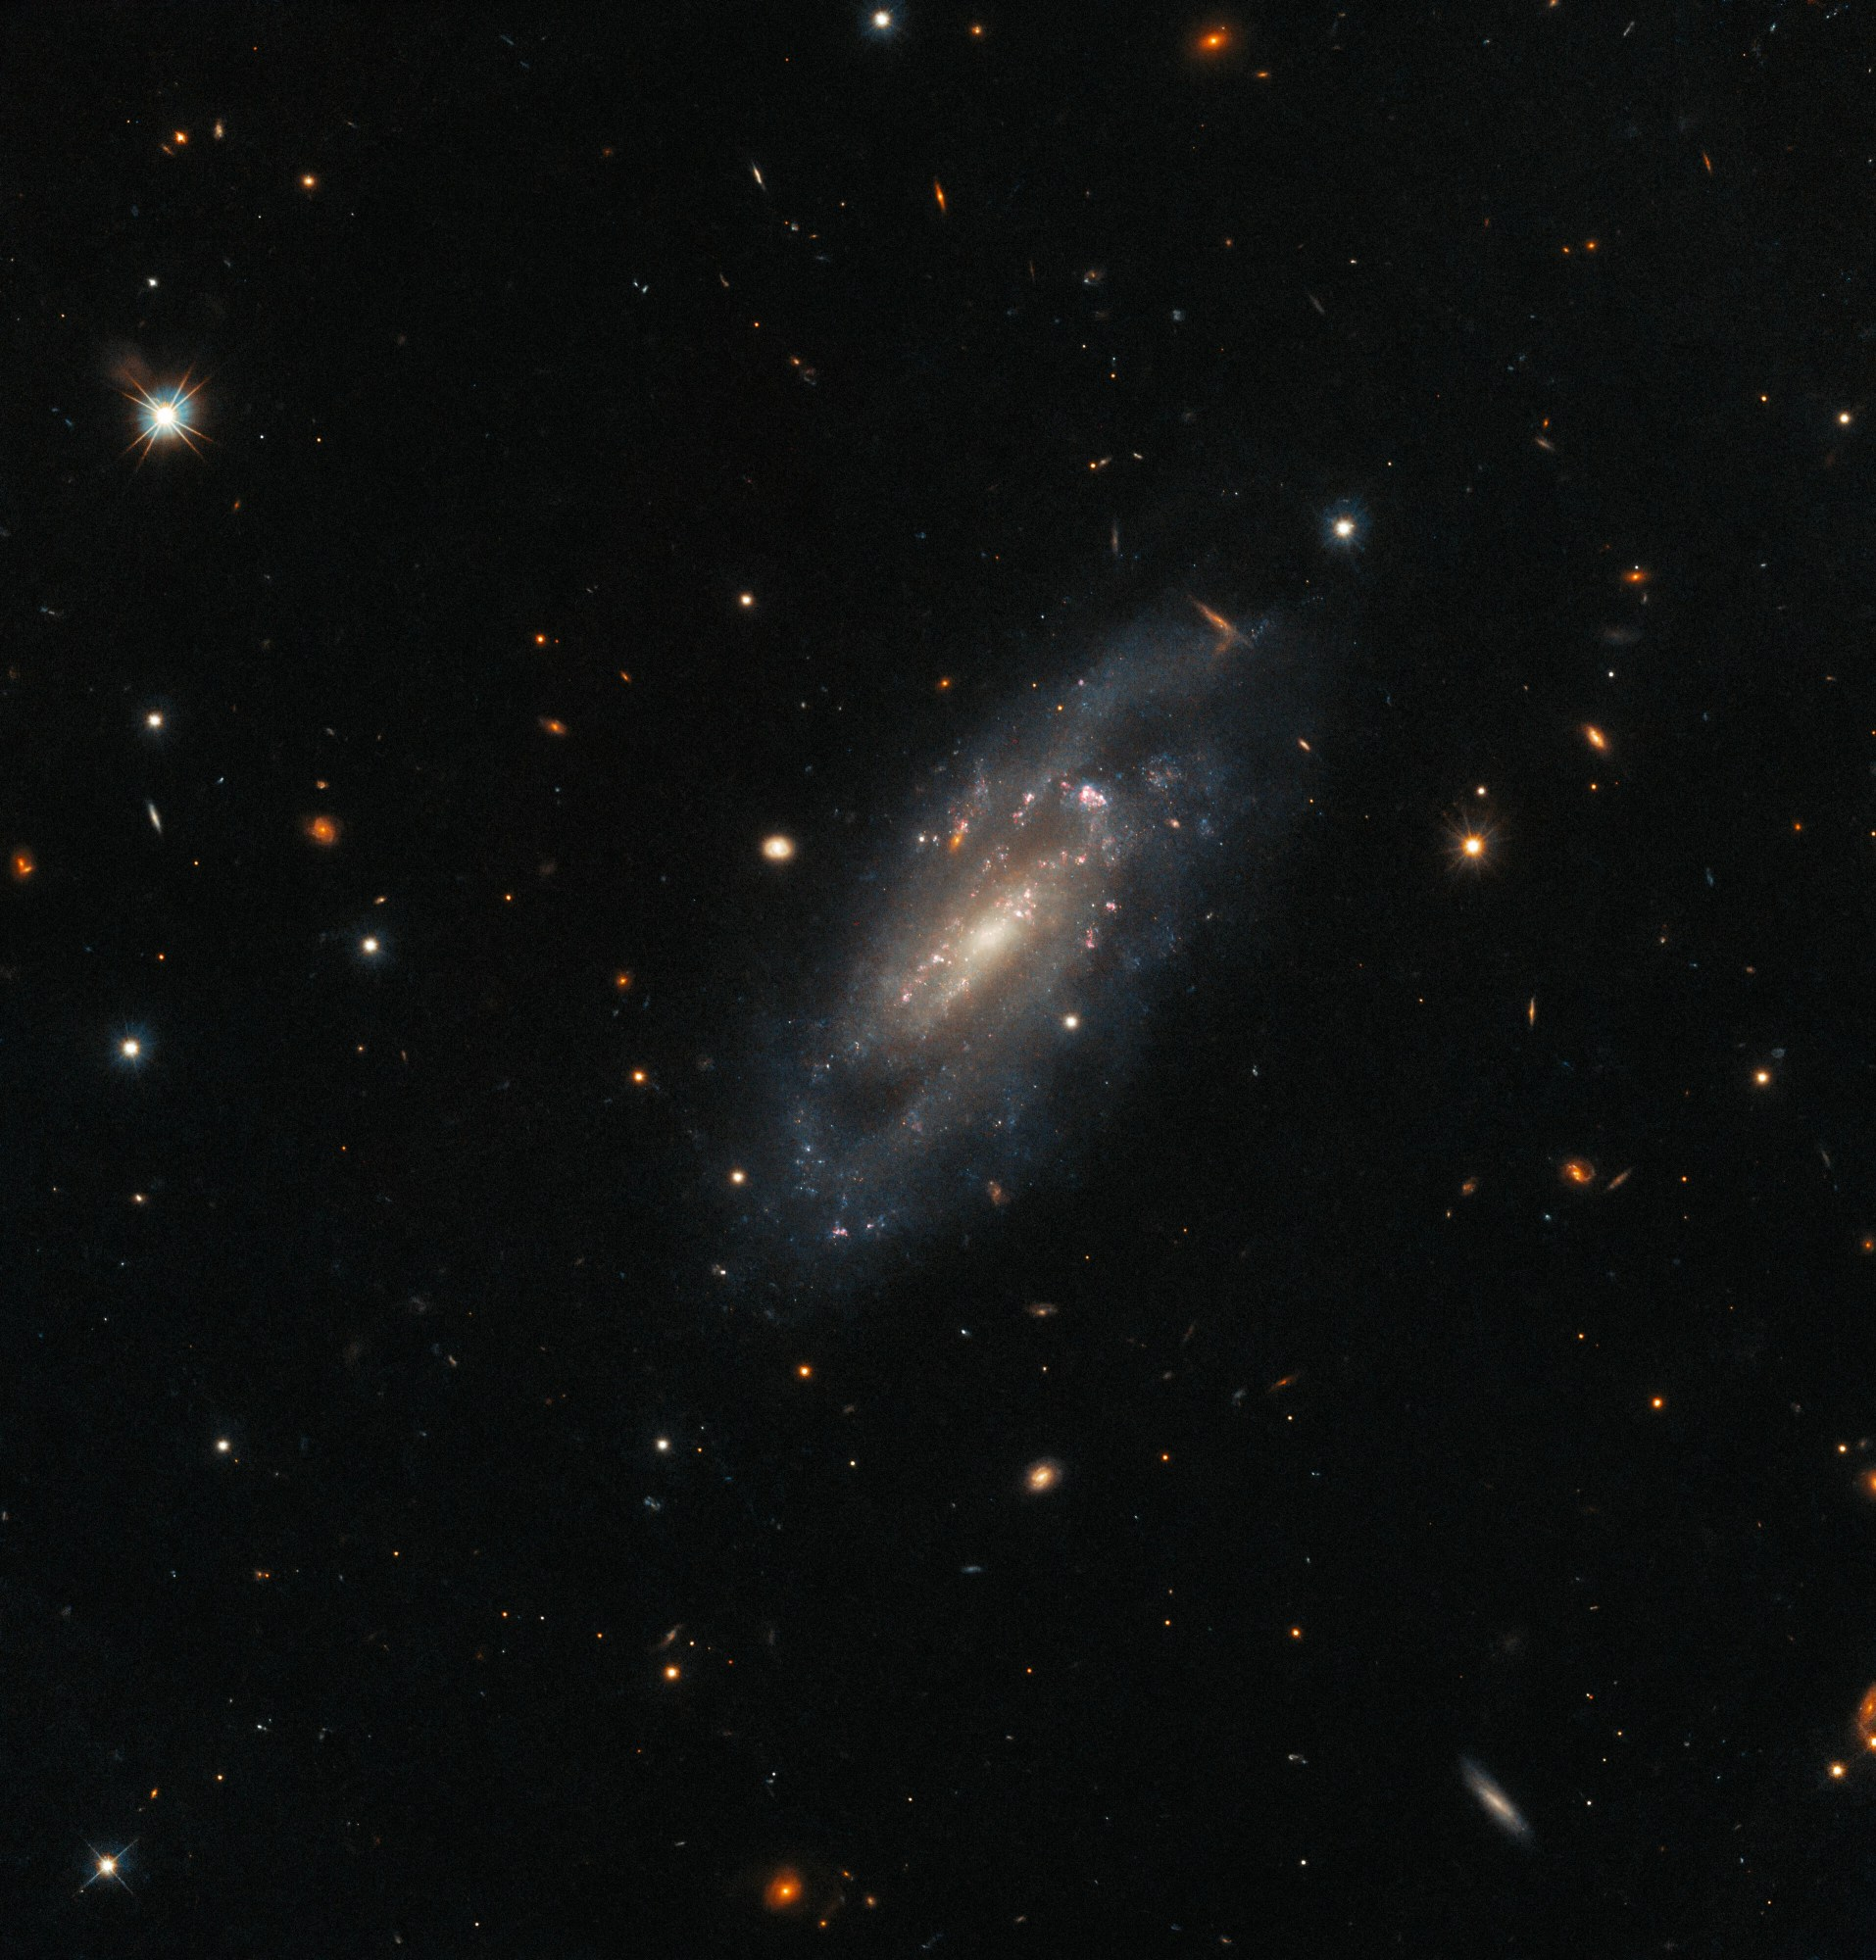 A spiral galaxy, a fuzzy oval tilted diagonally and partially towards the viewer. The center glows in warm colors, and has two prominent spiral arms around it, with bright points of star formation. The galaxy appears centrally in a field of small stars and galaxies on a dark background.